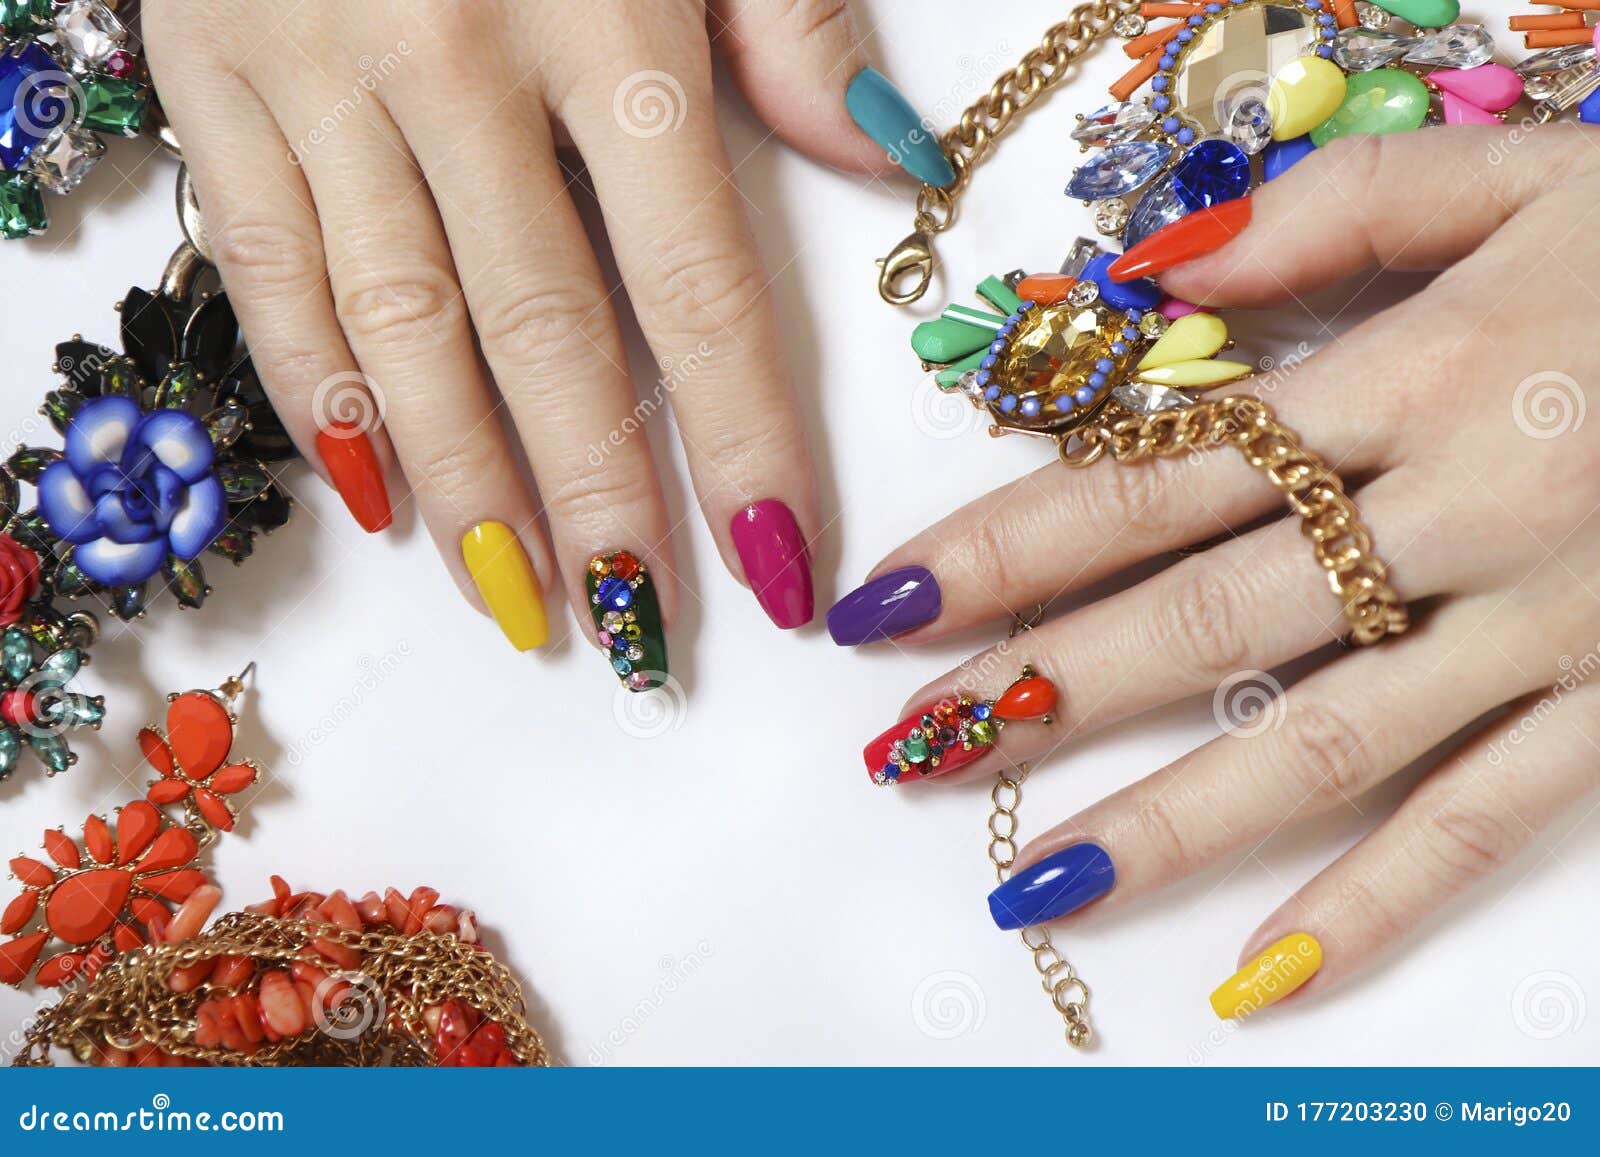 creative bright saturated manicure on long nails with rhinestones.